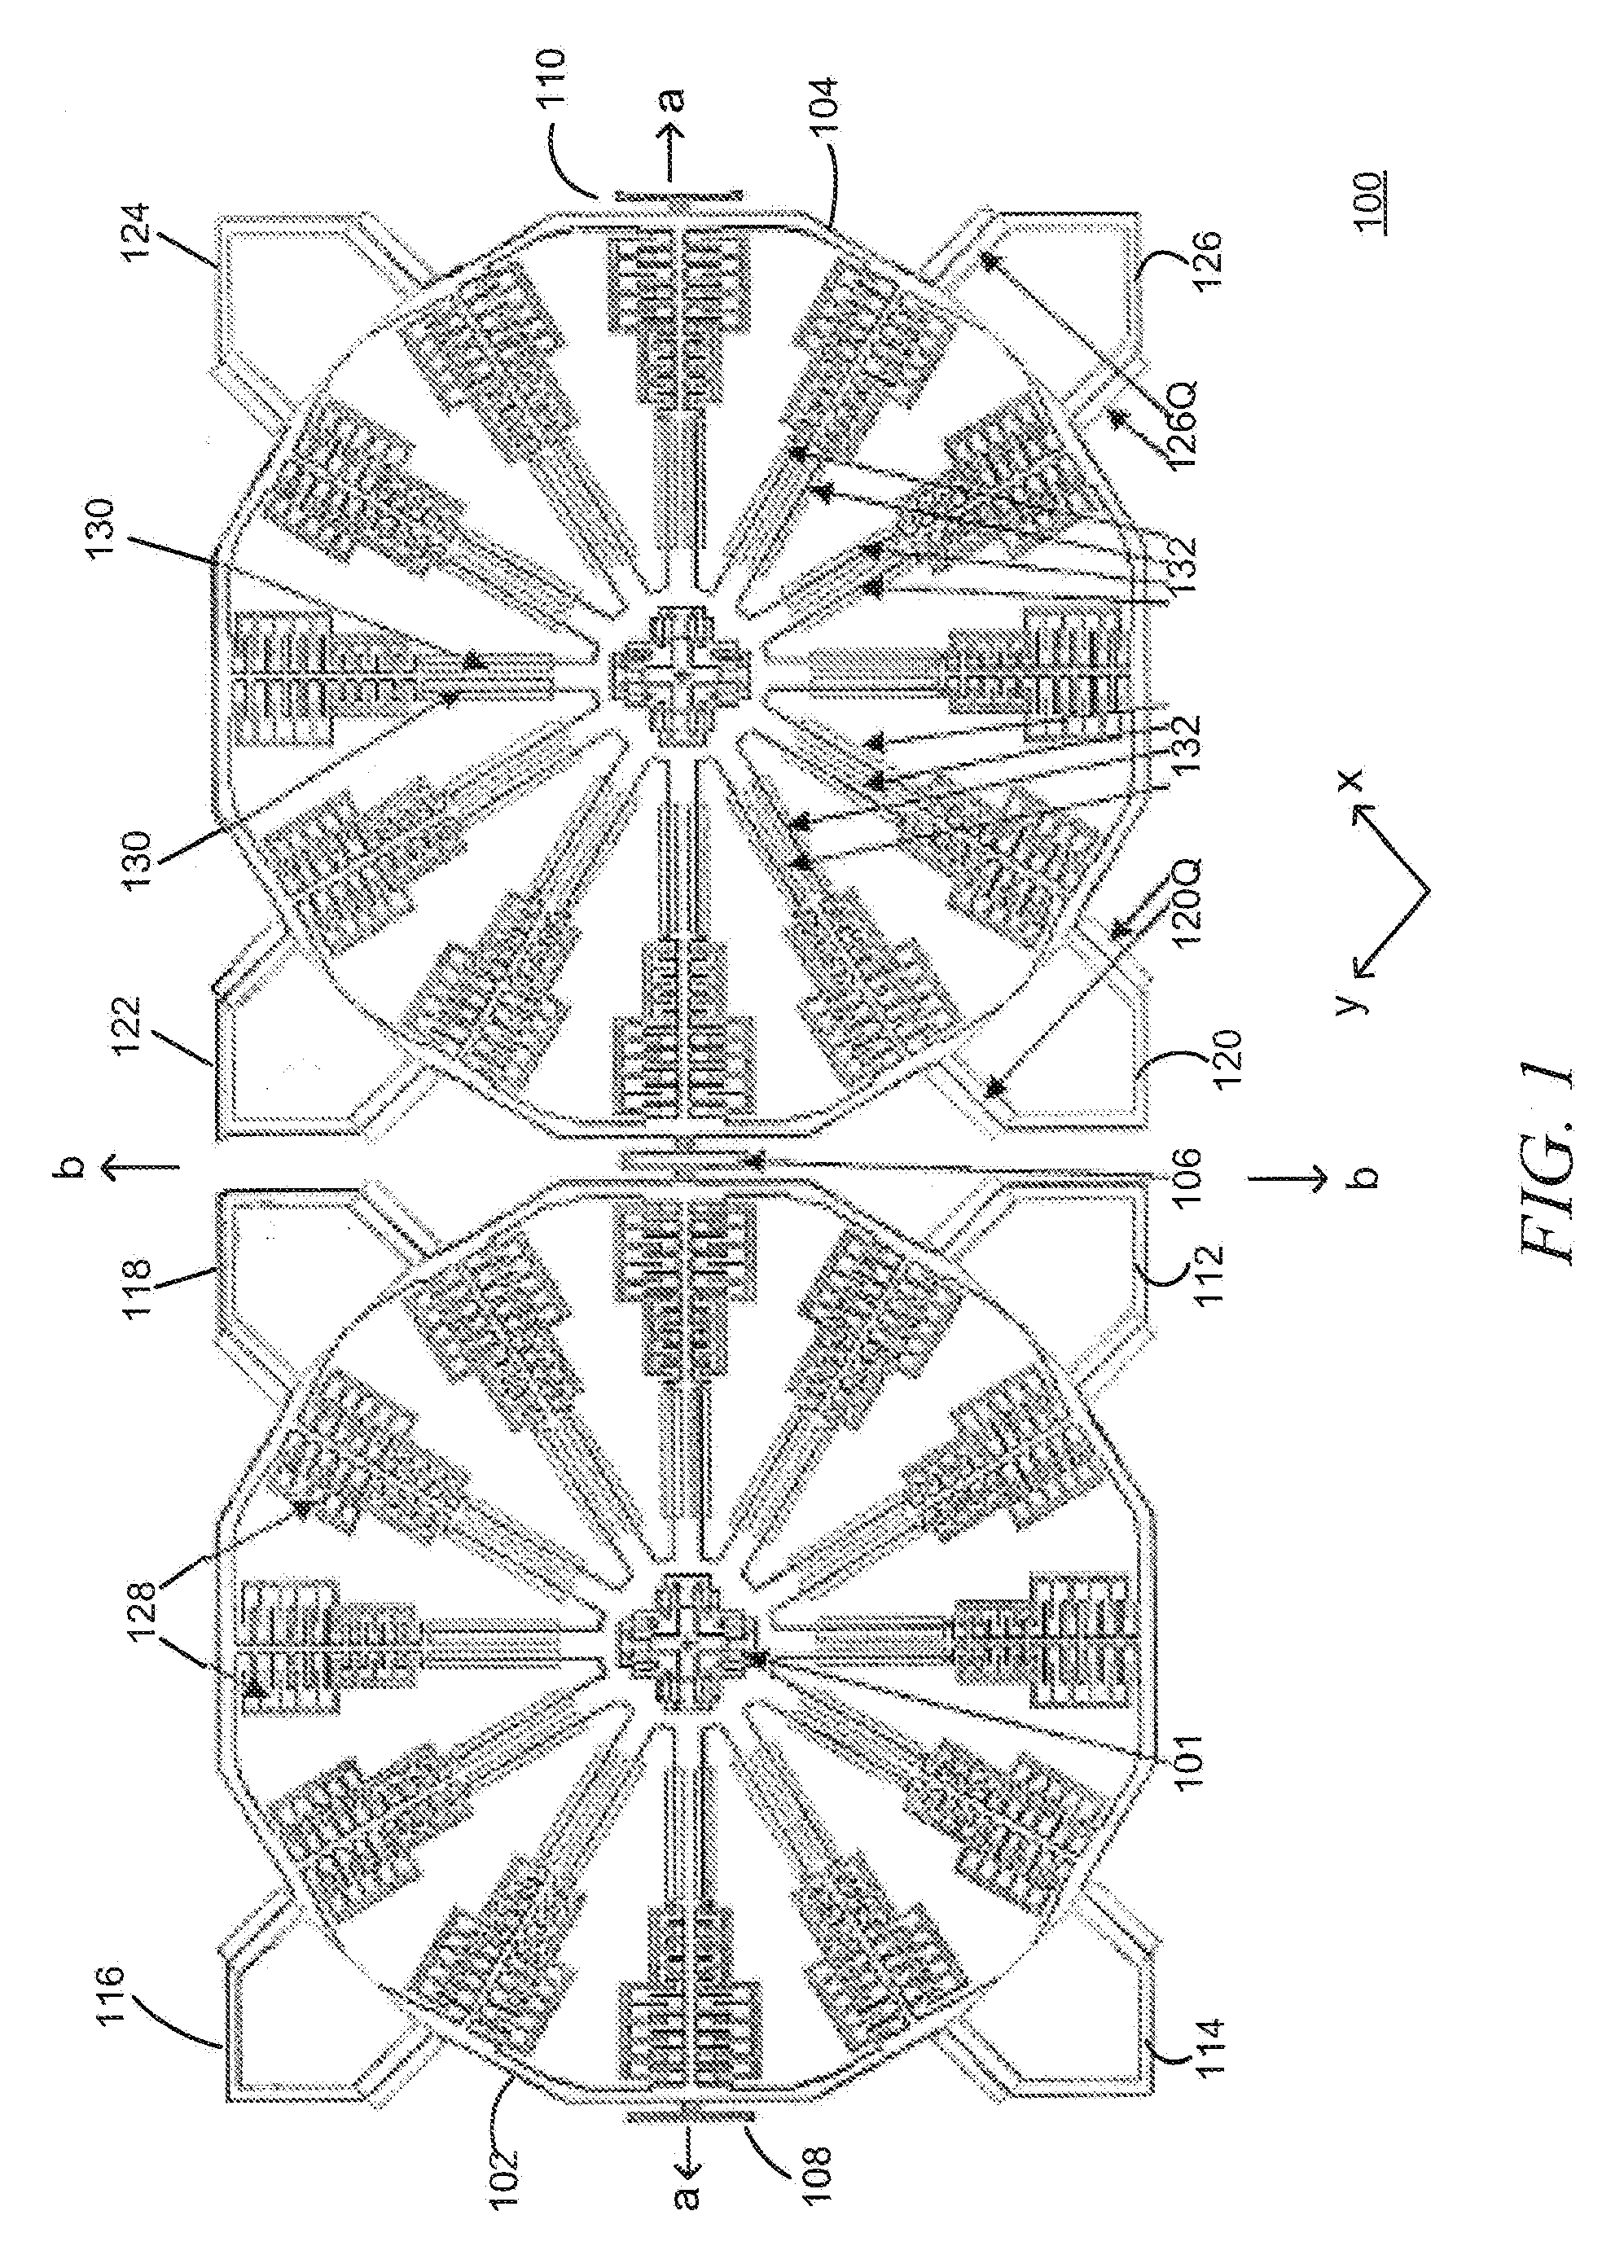 Mode-Matching Apparatus and Method for Micromachined Inertial Sensors